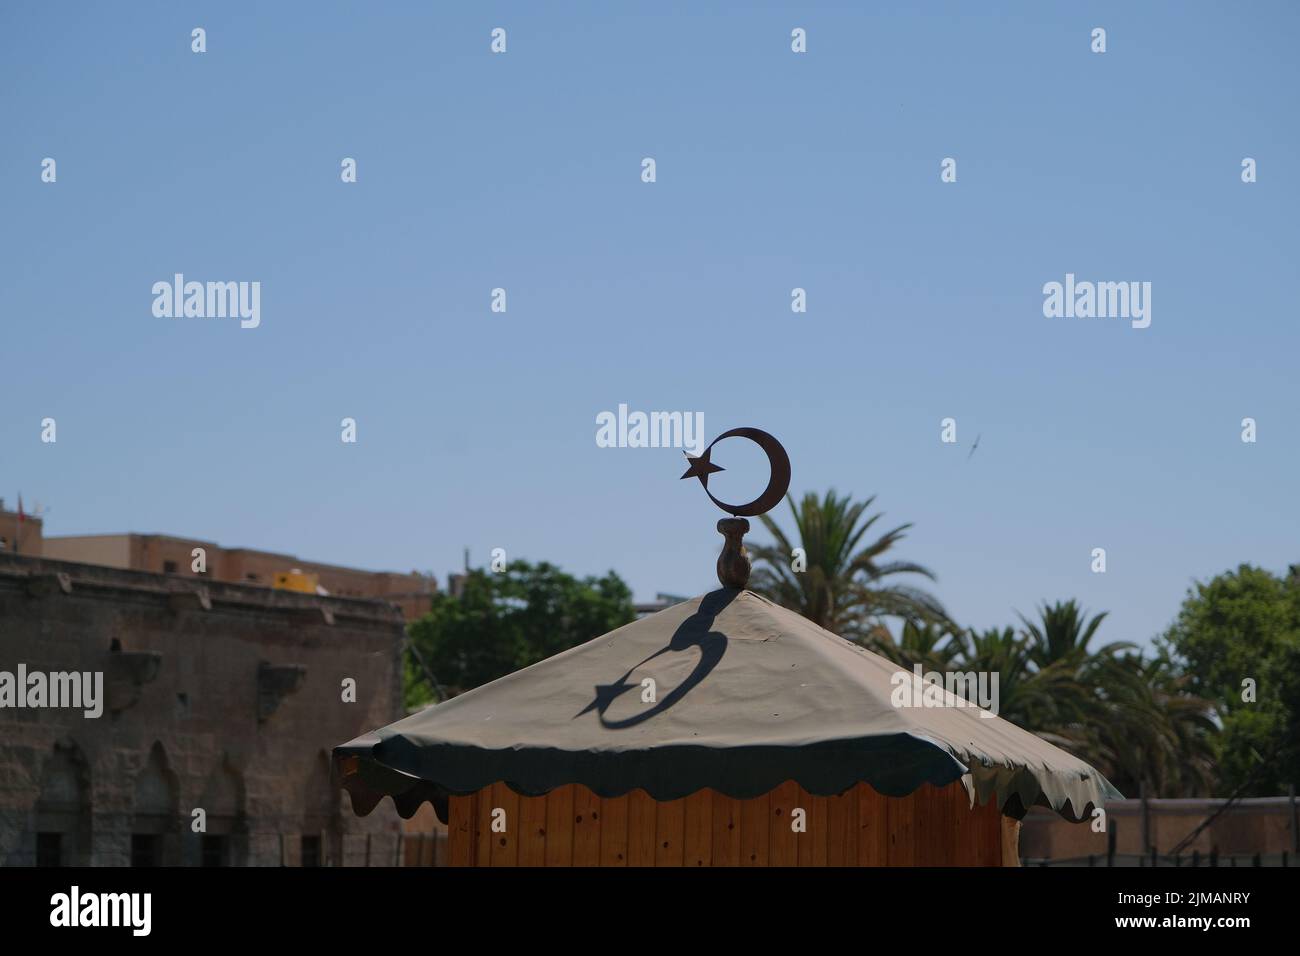 Turkish flag symbol, crescent moon and star, its shadow on roof during sunrise. Stock Photo